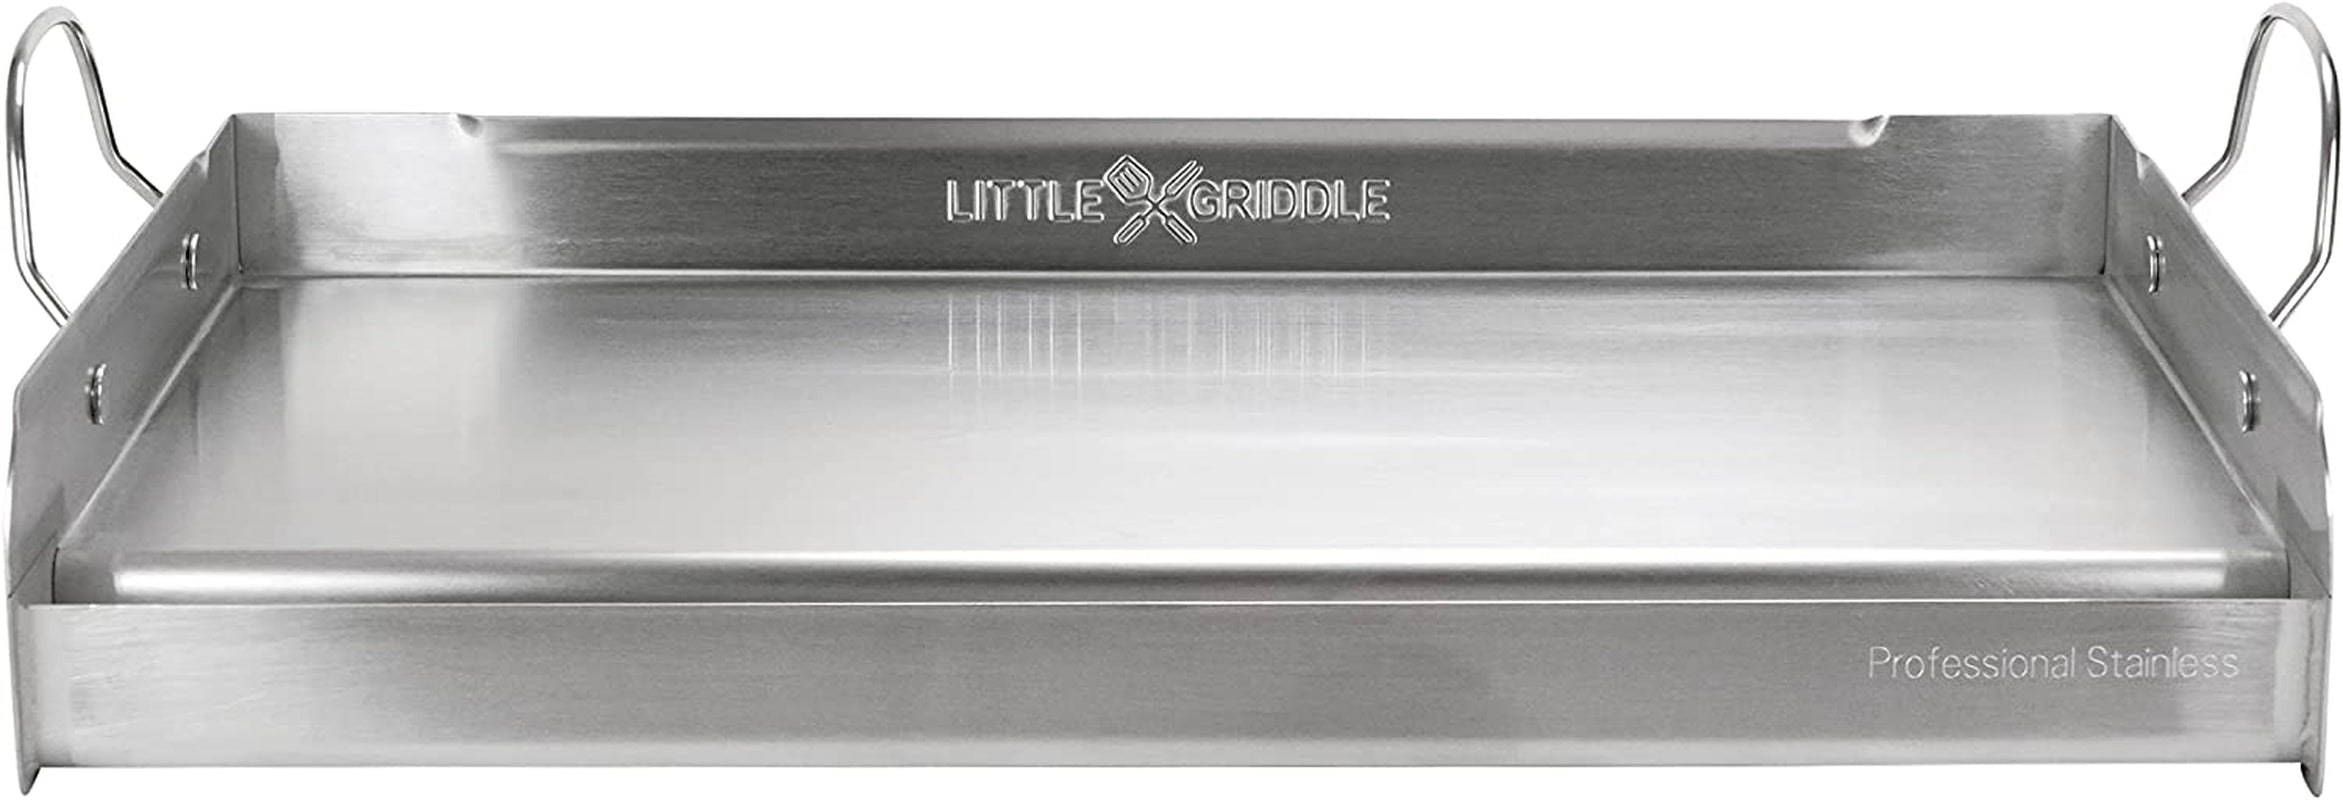 Little Griddle, Griddle-Q GQ230 100% Stainless Steel Professional Quality Griddle with Even Heat Cross Bracing and Removable Handles for Charcoal/Gas Grills, Camping, Tailgating, and Parties (25"X16"X6.5")